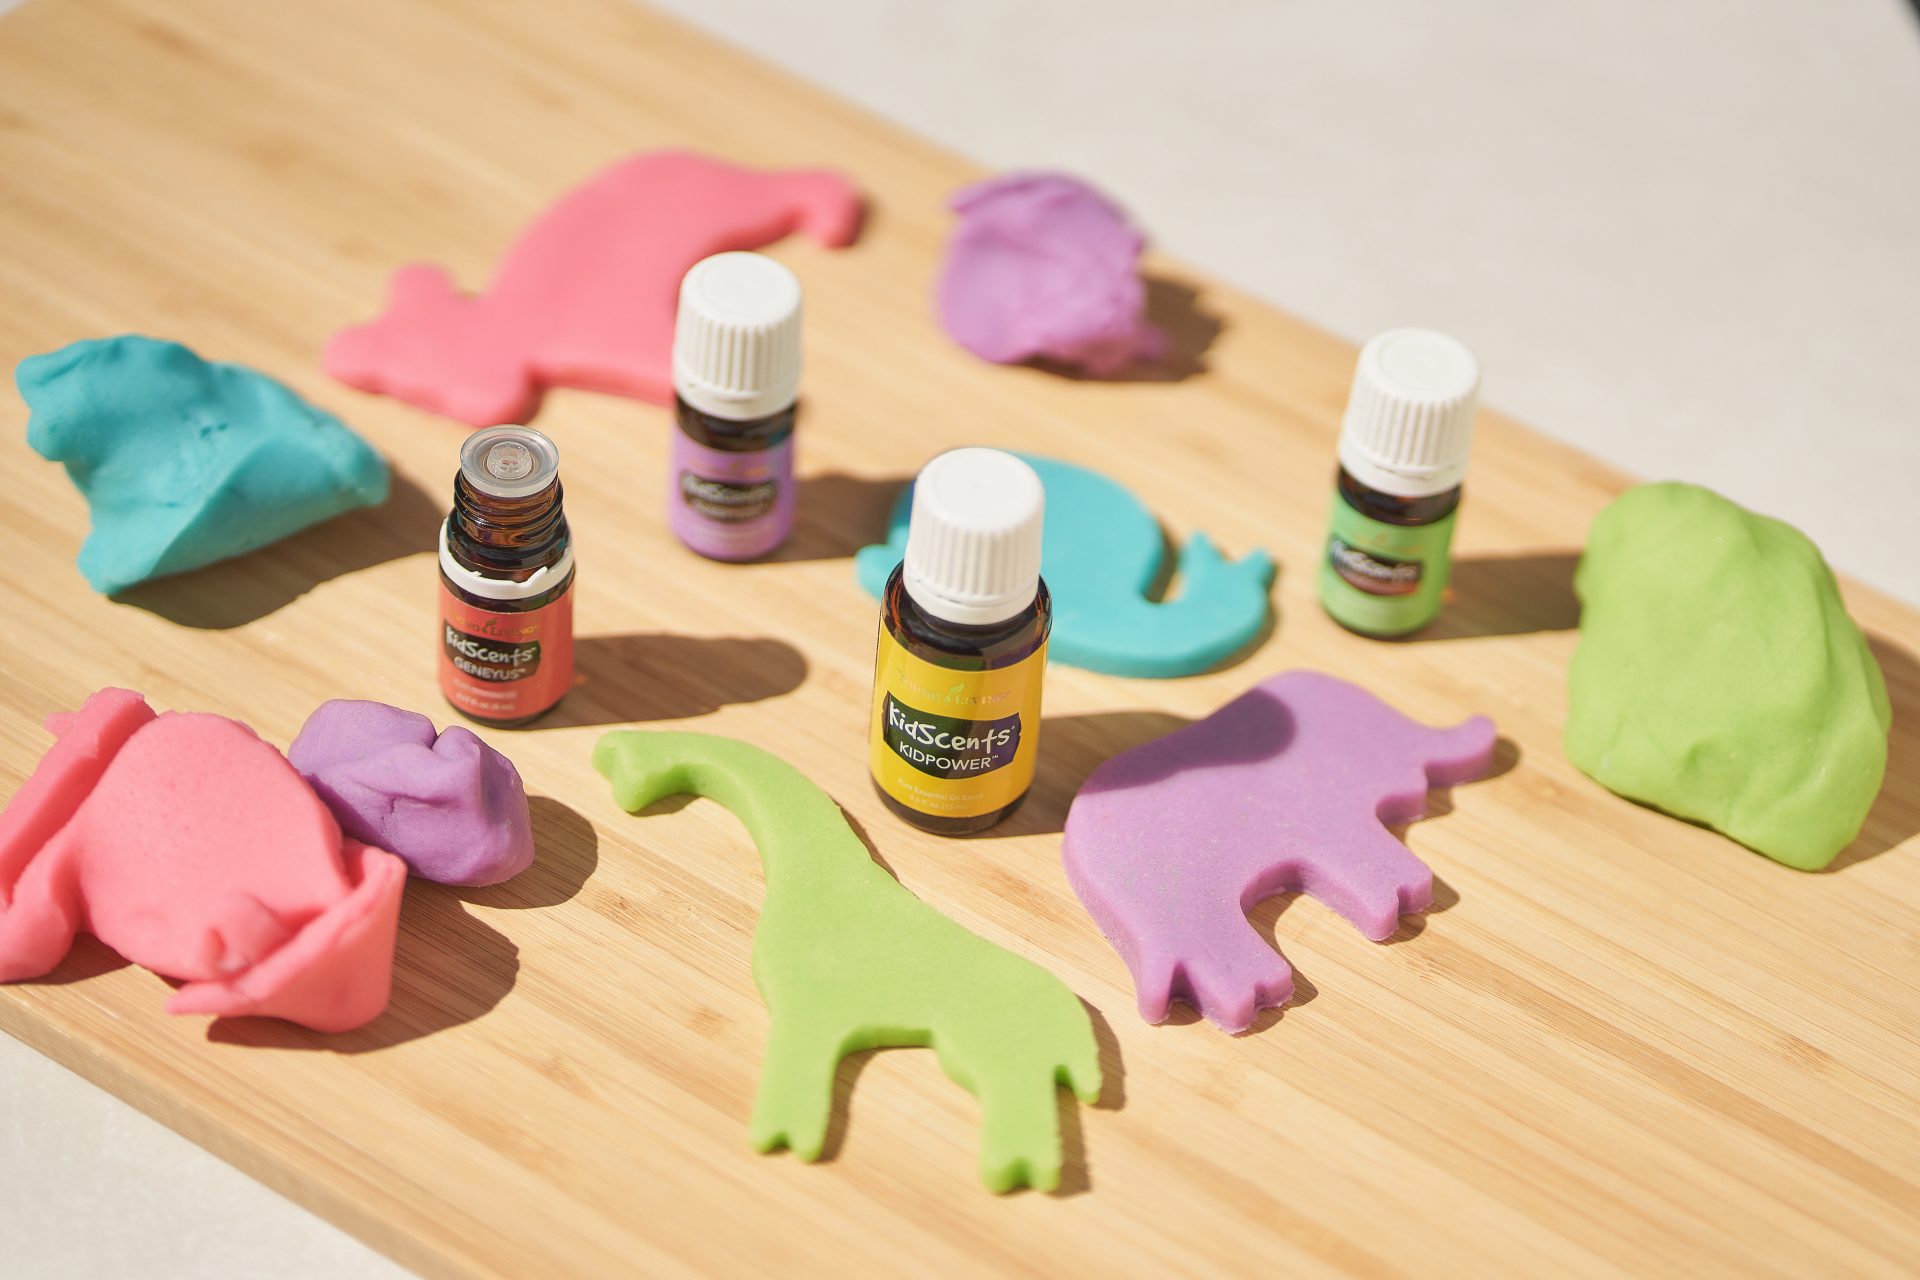 KidScents Play Dough - Young Living Lavender Life Blog